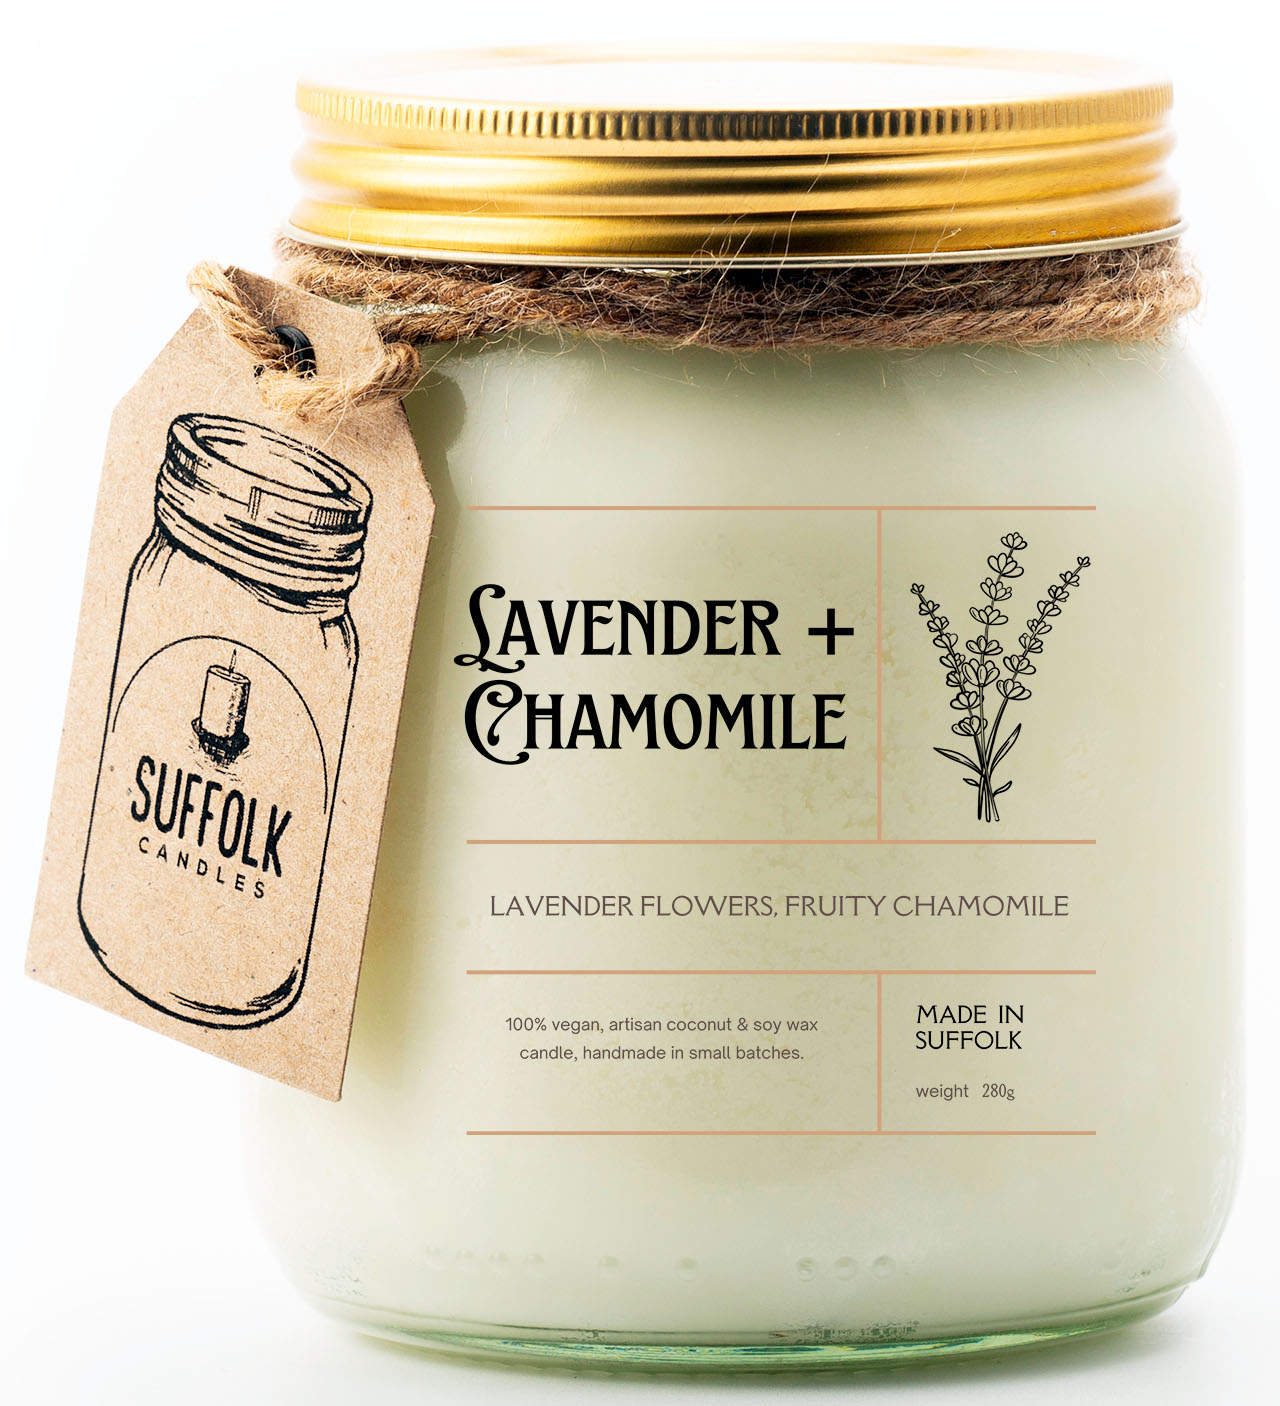 Lavender & Chamomile Candle, Soothing Scent of Lavender and Relaxing Chamomile